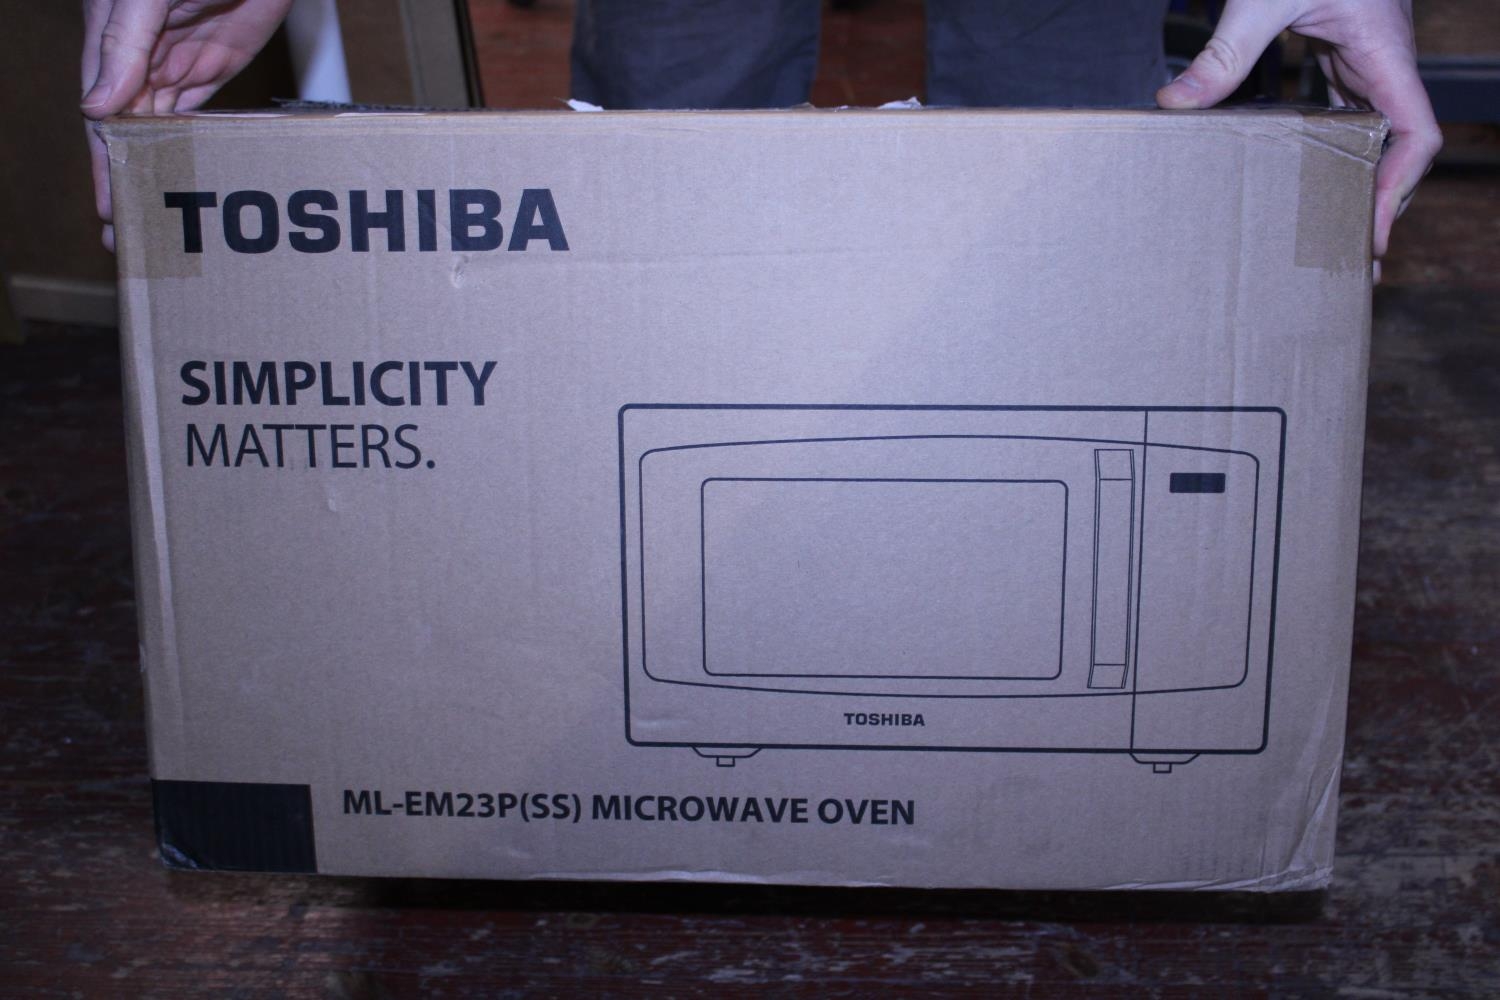 A new boxed Toshiba microwave oven, postage unavailable